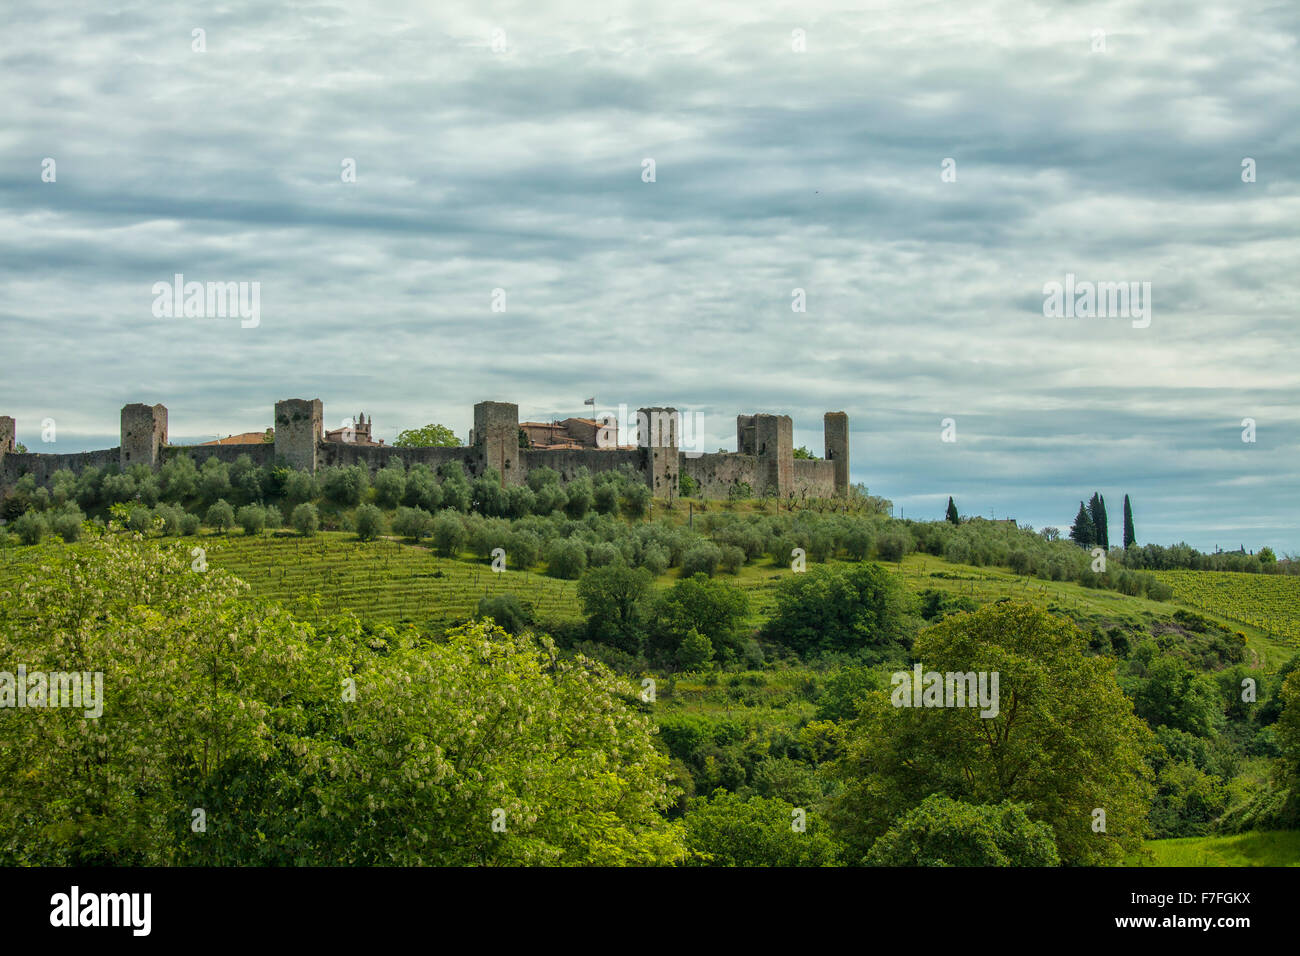 The medieval  walled town of Monteriggioni in Tuscany, Italy Stock Photo